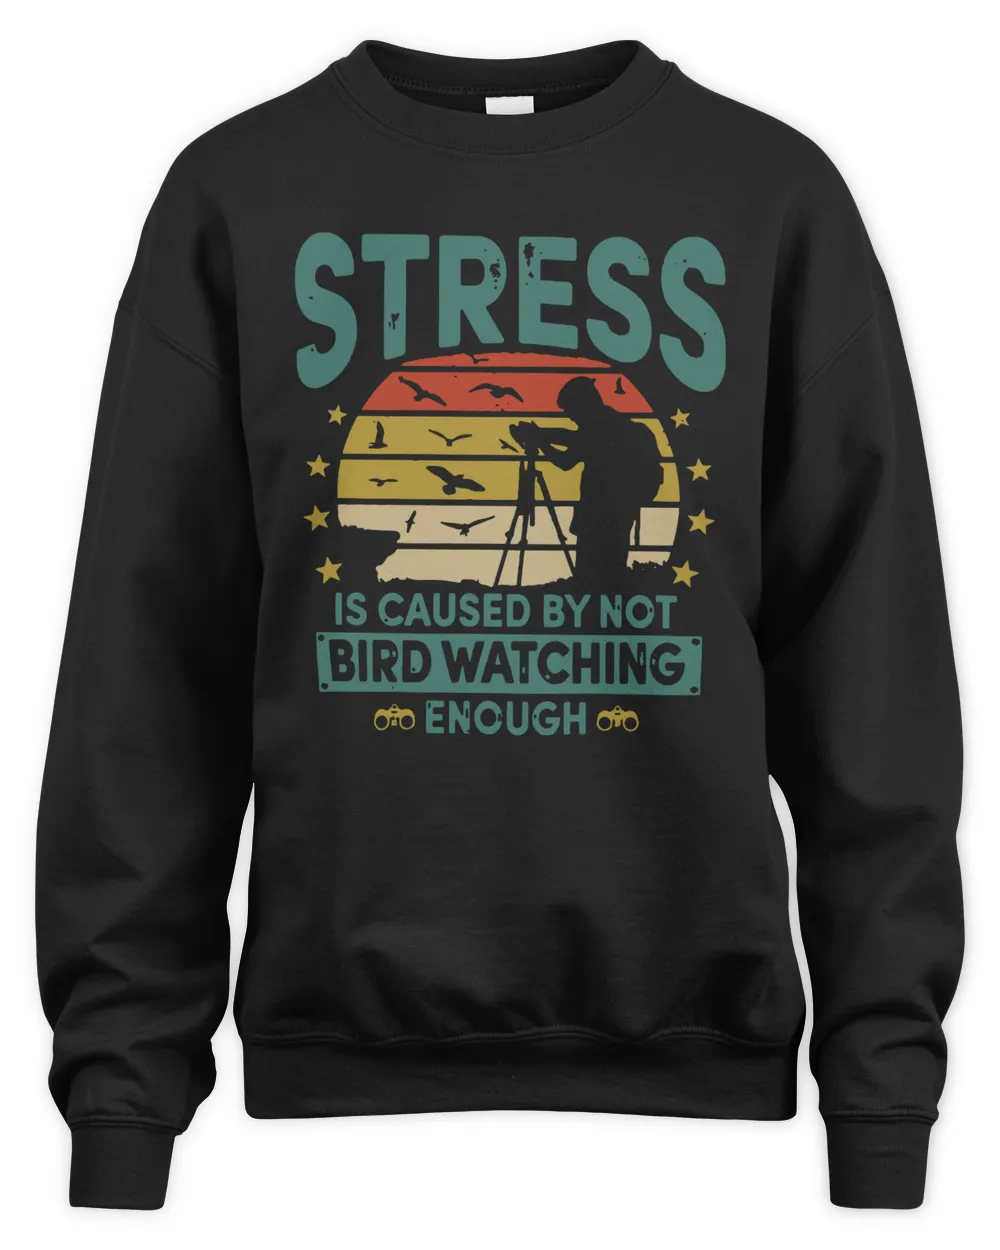 Stress Is Caused By Not Bird Watching Enough Vintage Shirt